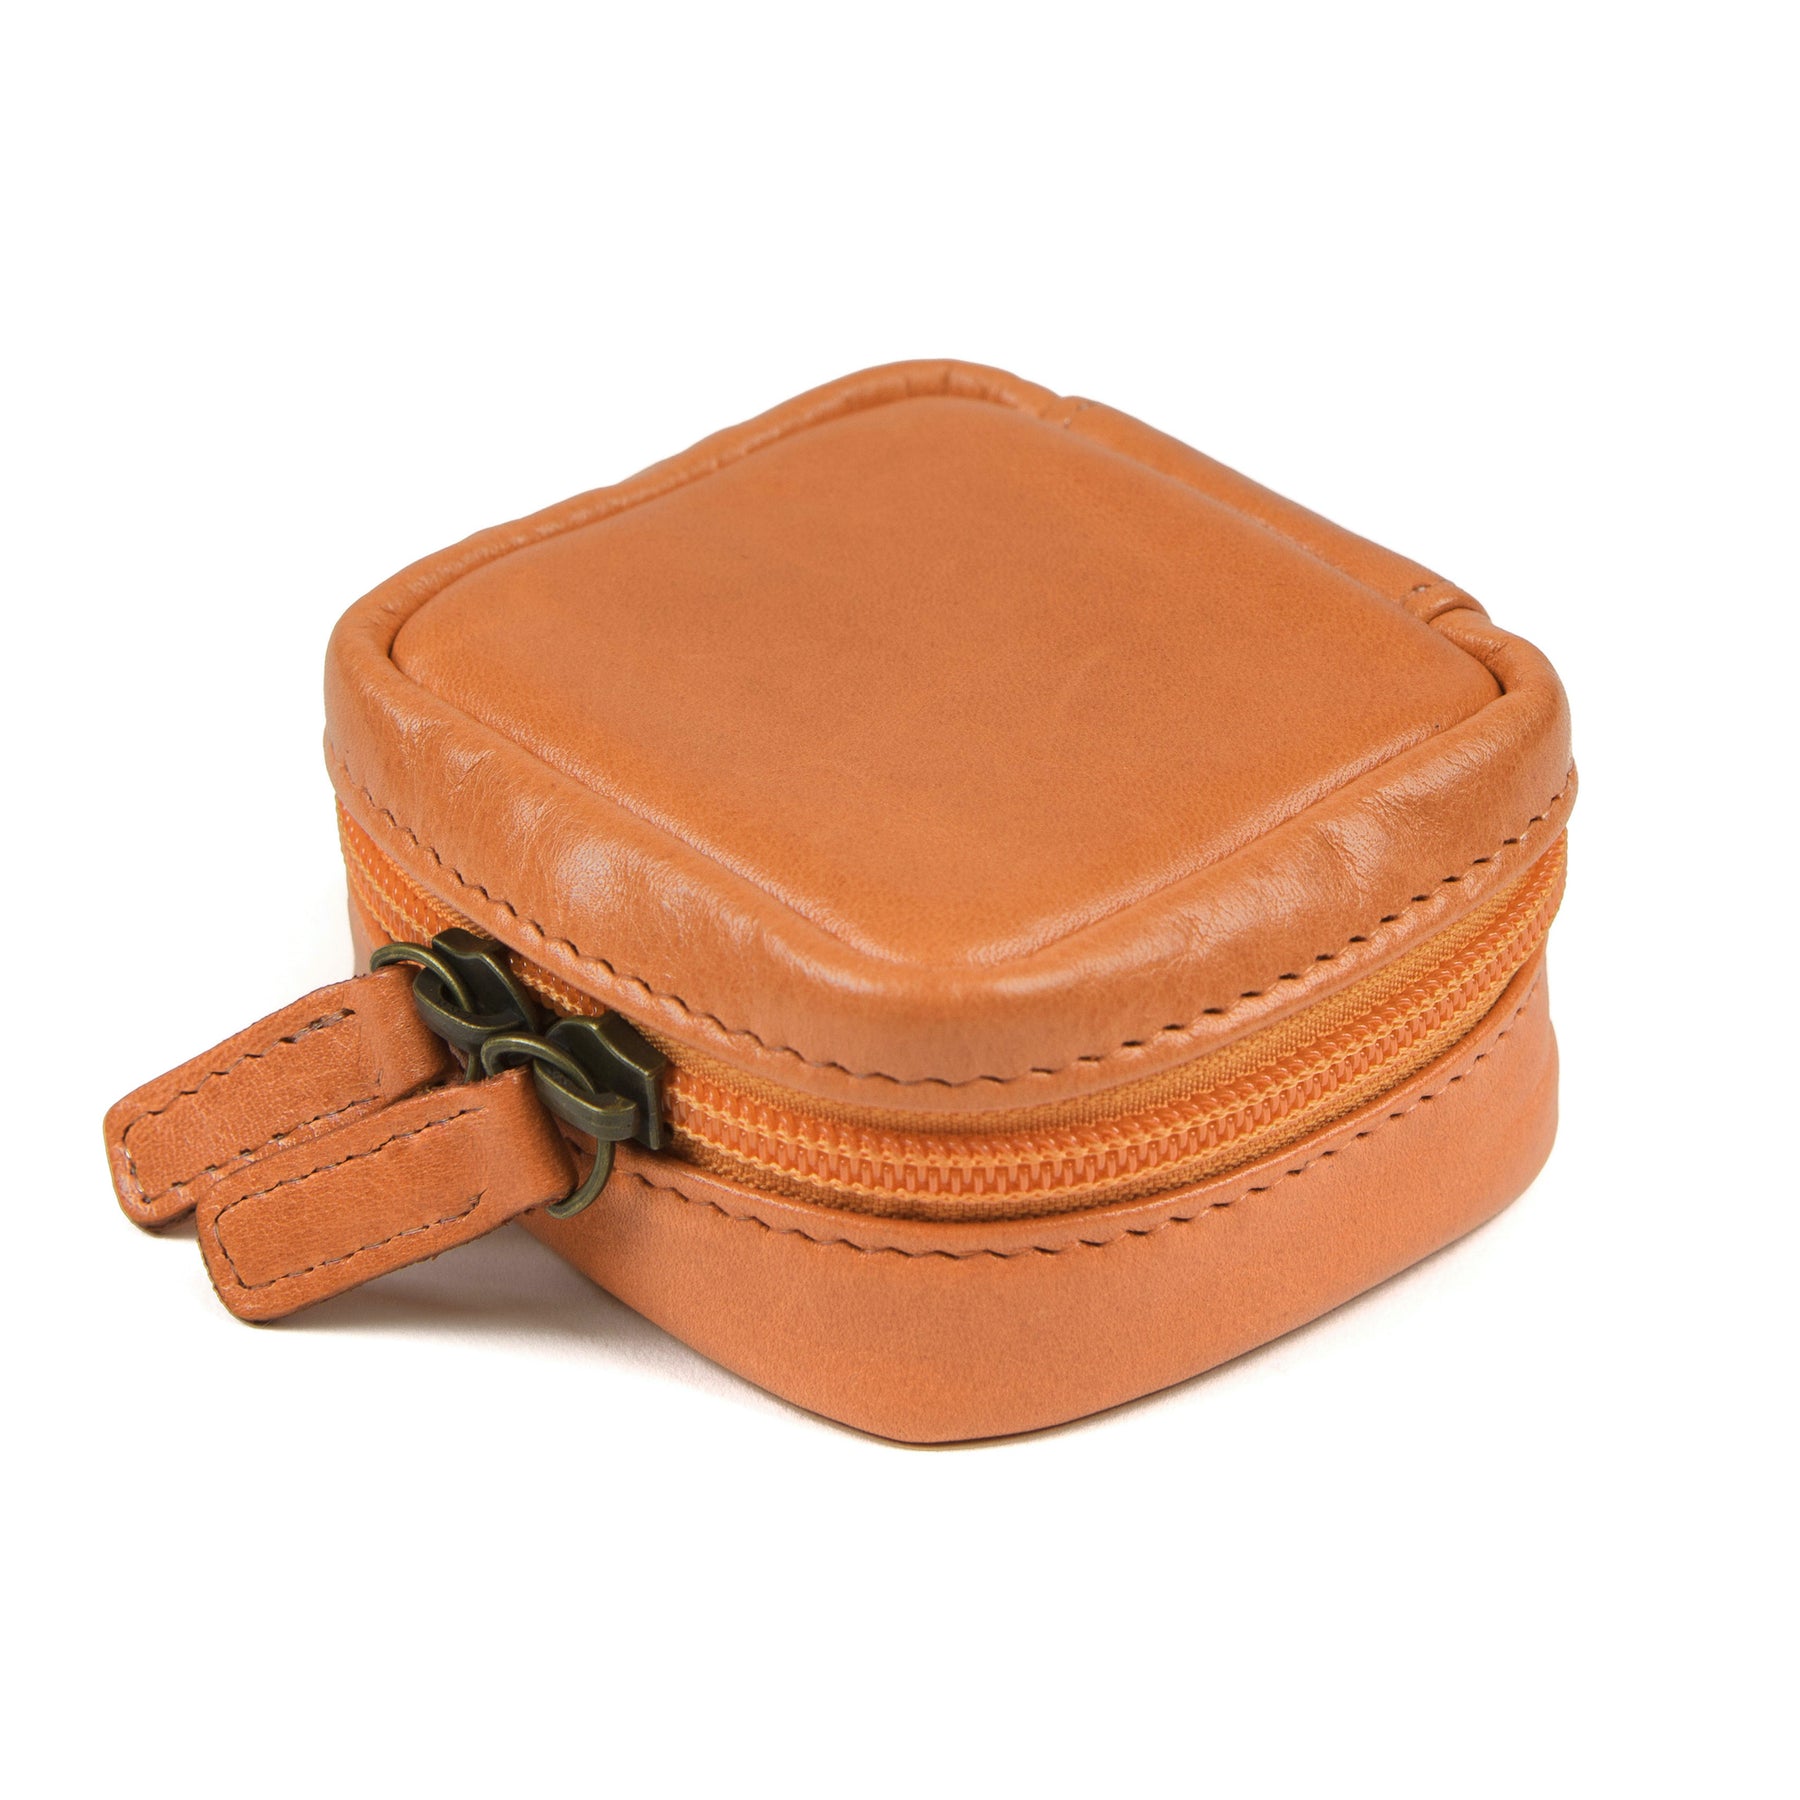 Moore & Giles Leather Travel Pouch - Large Baldwin Oak